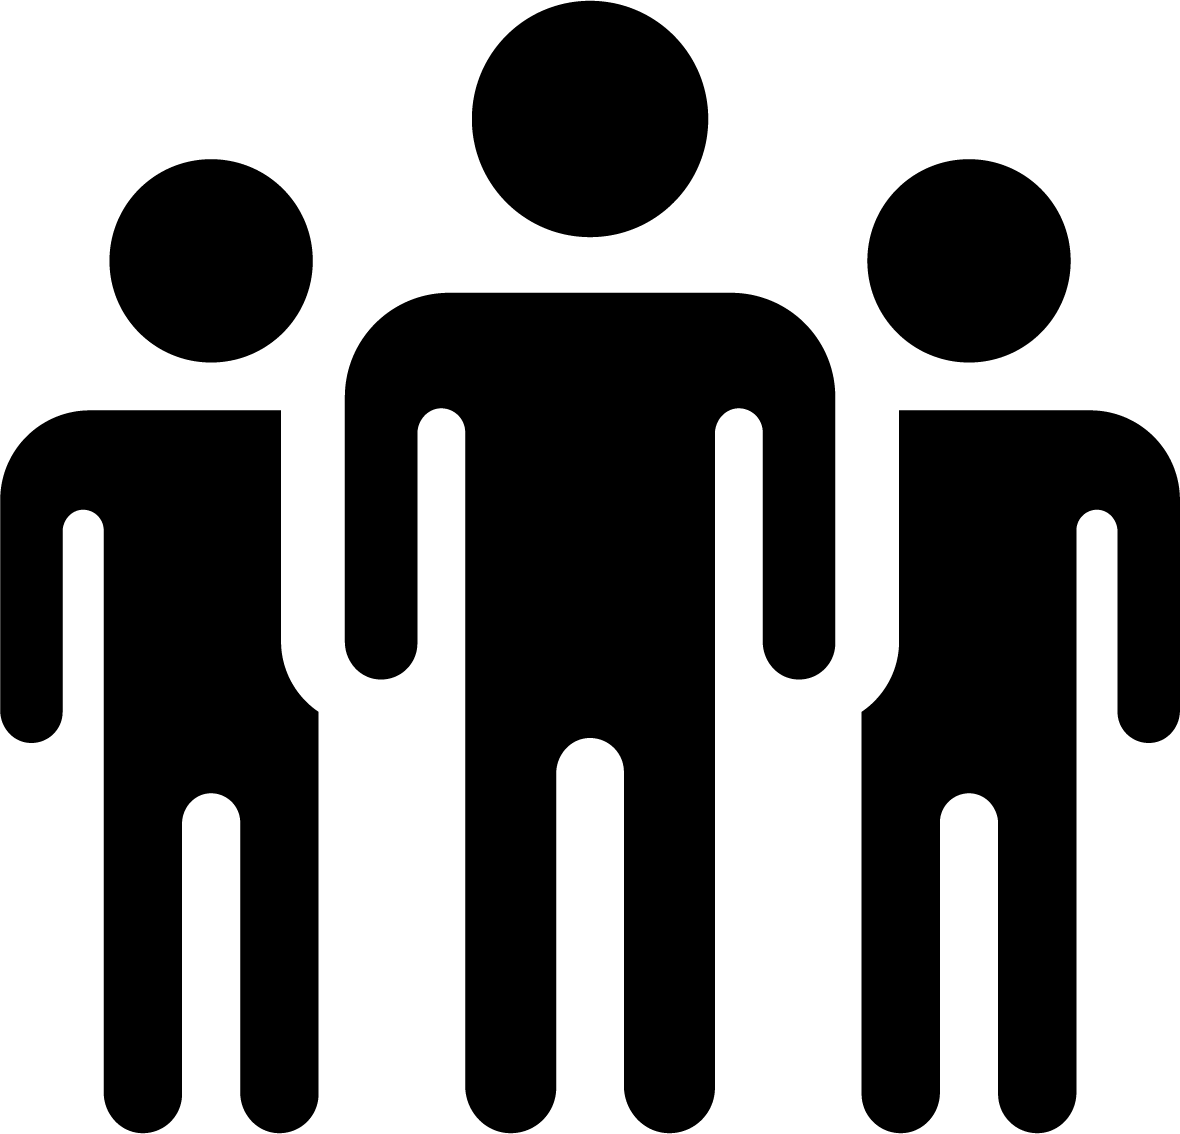 Silhouette of 3 people standing together